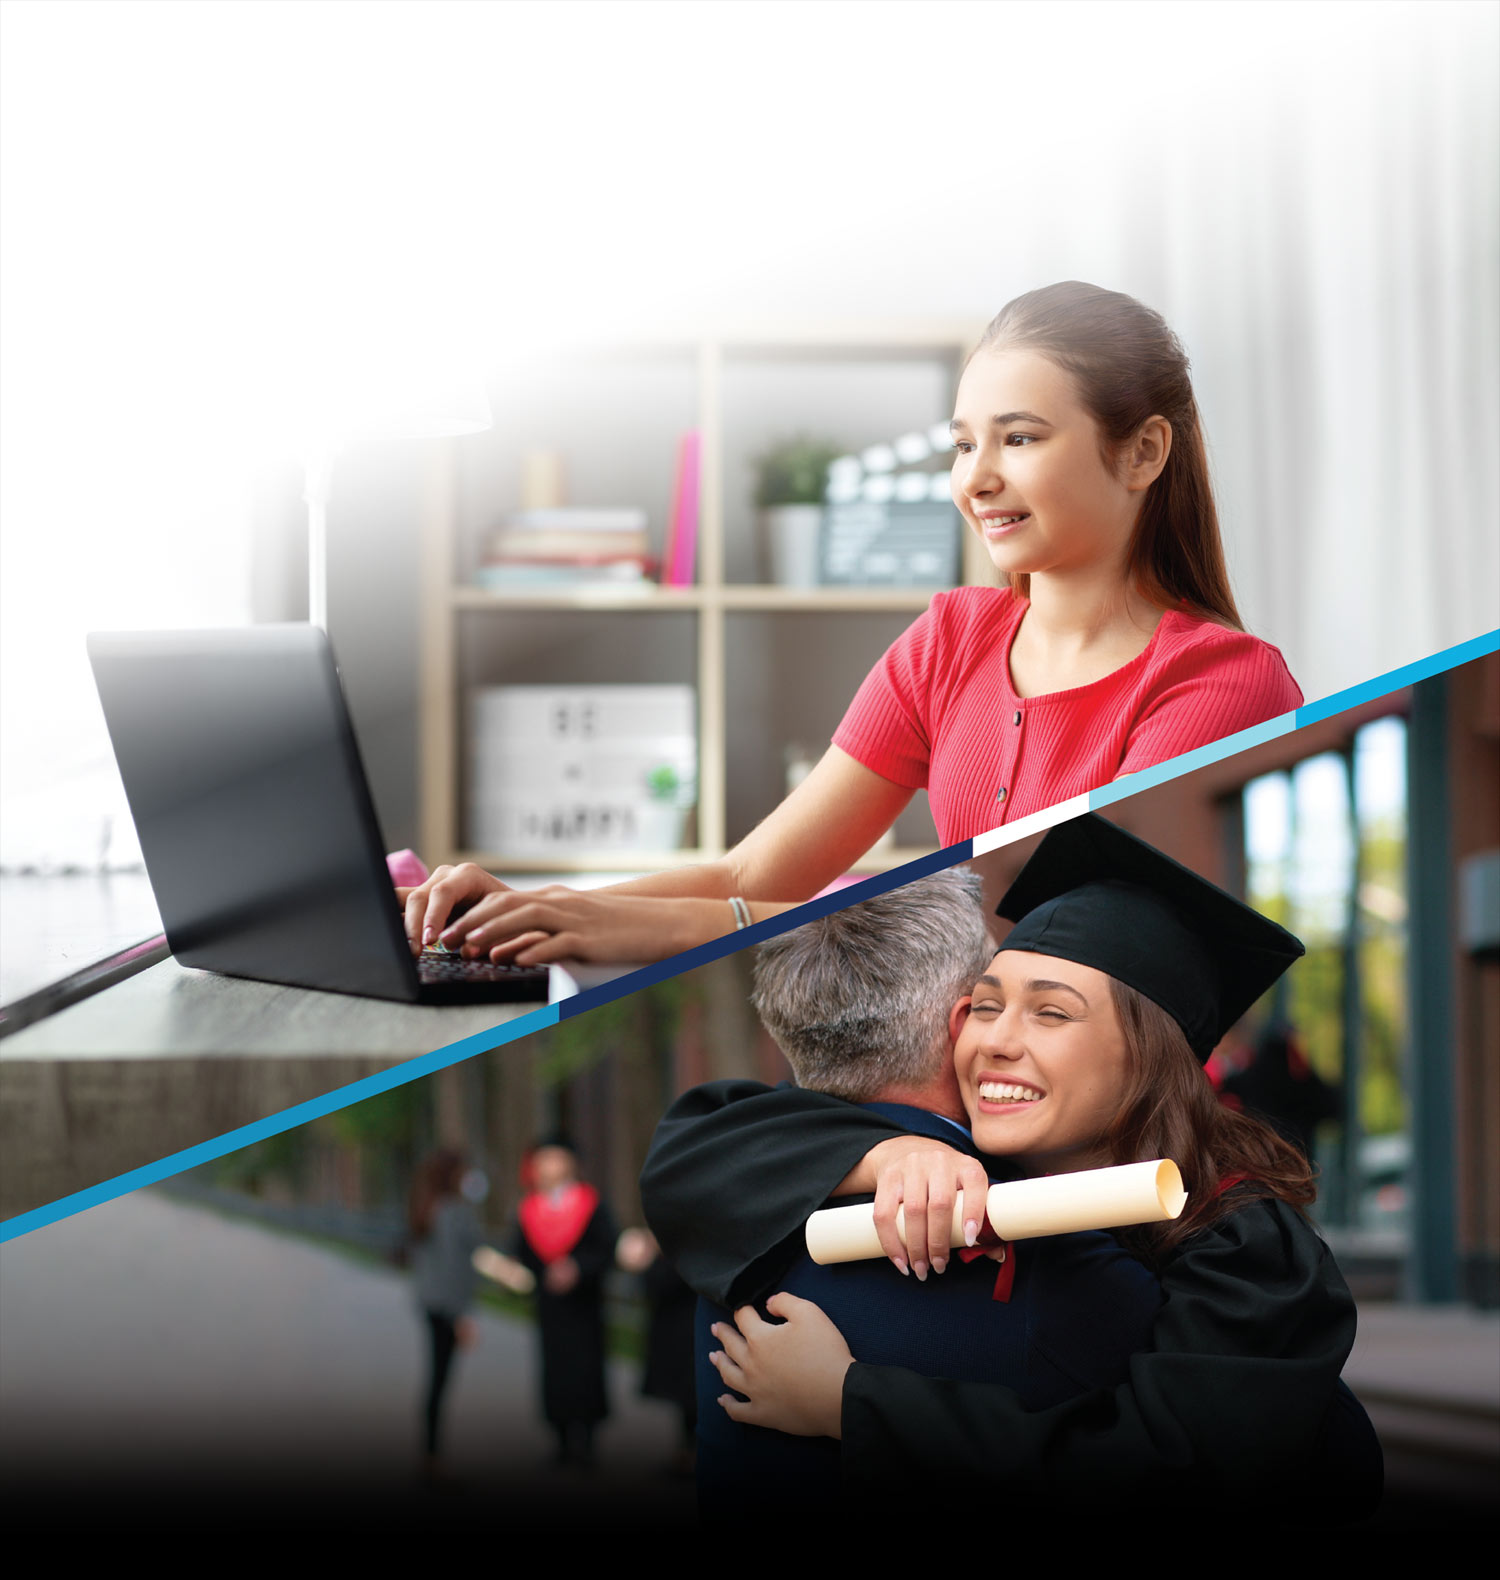 top: a little girl smiles while working on a laptop; bottom: the same little girl, grown up and hugging a family member at graduation